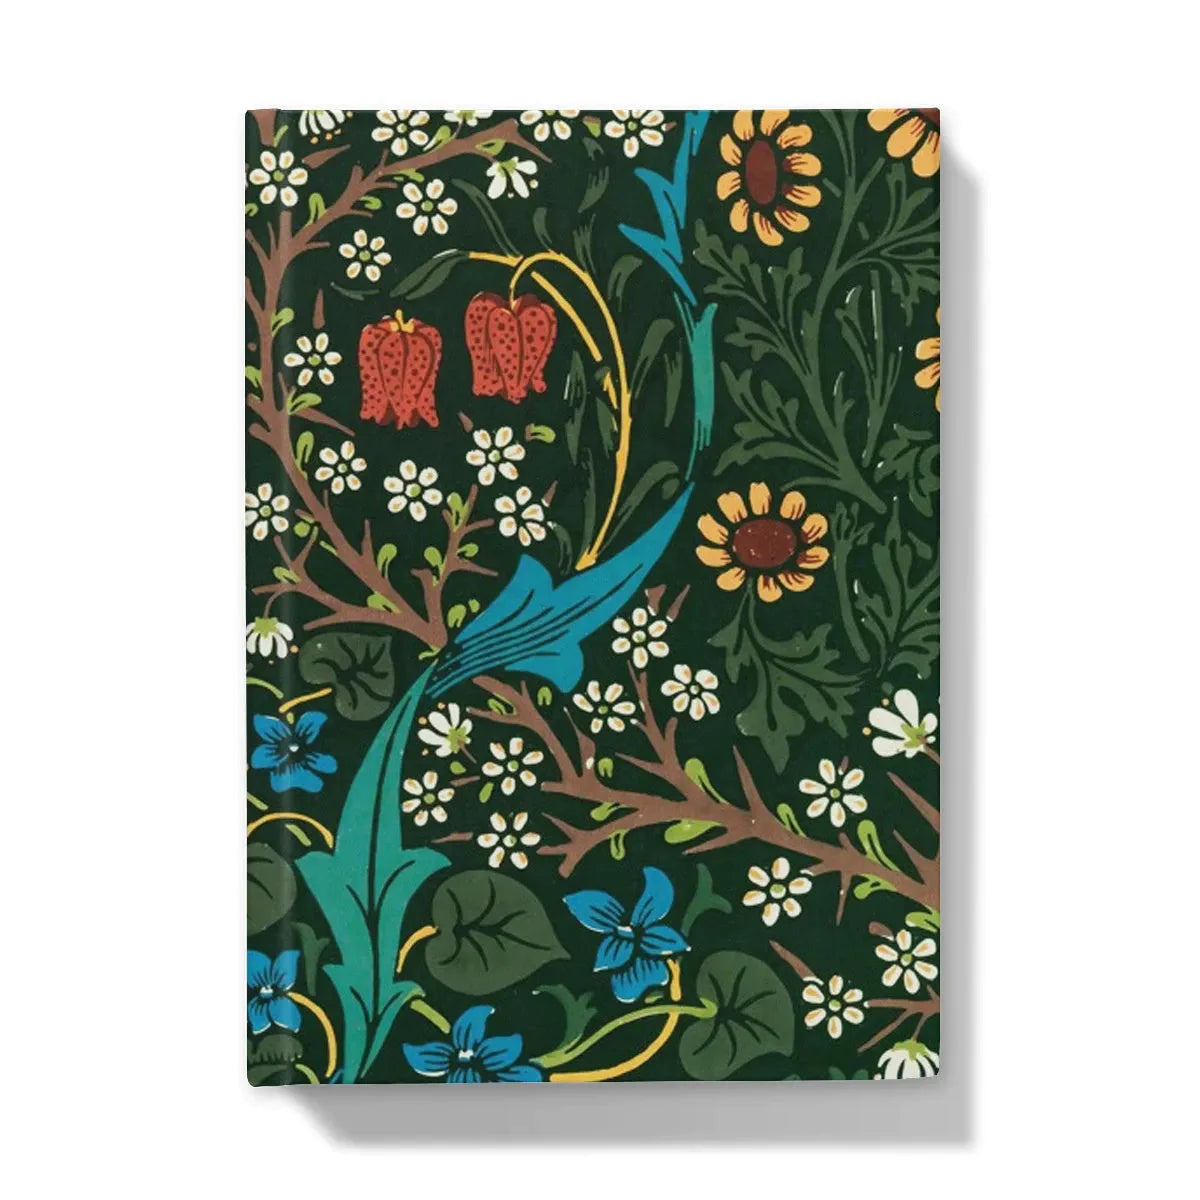 Tulips By William Morris Hardback Journal - 5’x7’ / 5’ x 7’ - Lined Paper - Notebooks & Notepads - Aesthetic Art